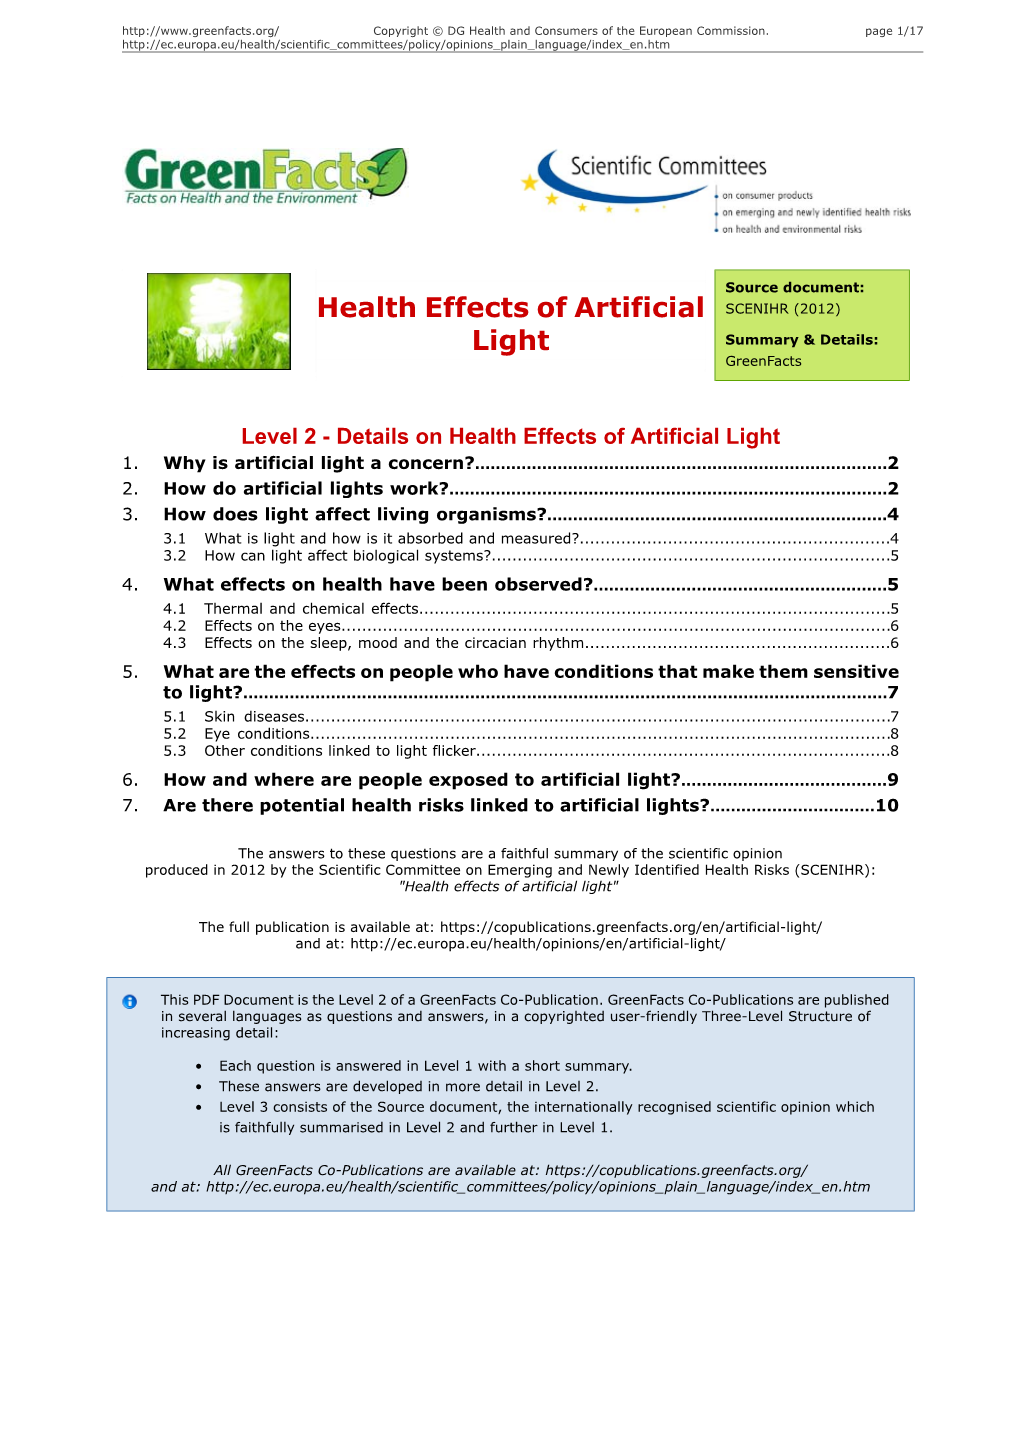 Health Effects of Artificial Light 1